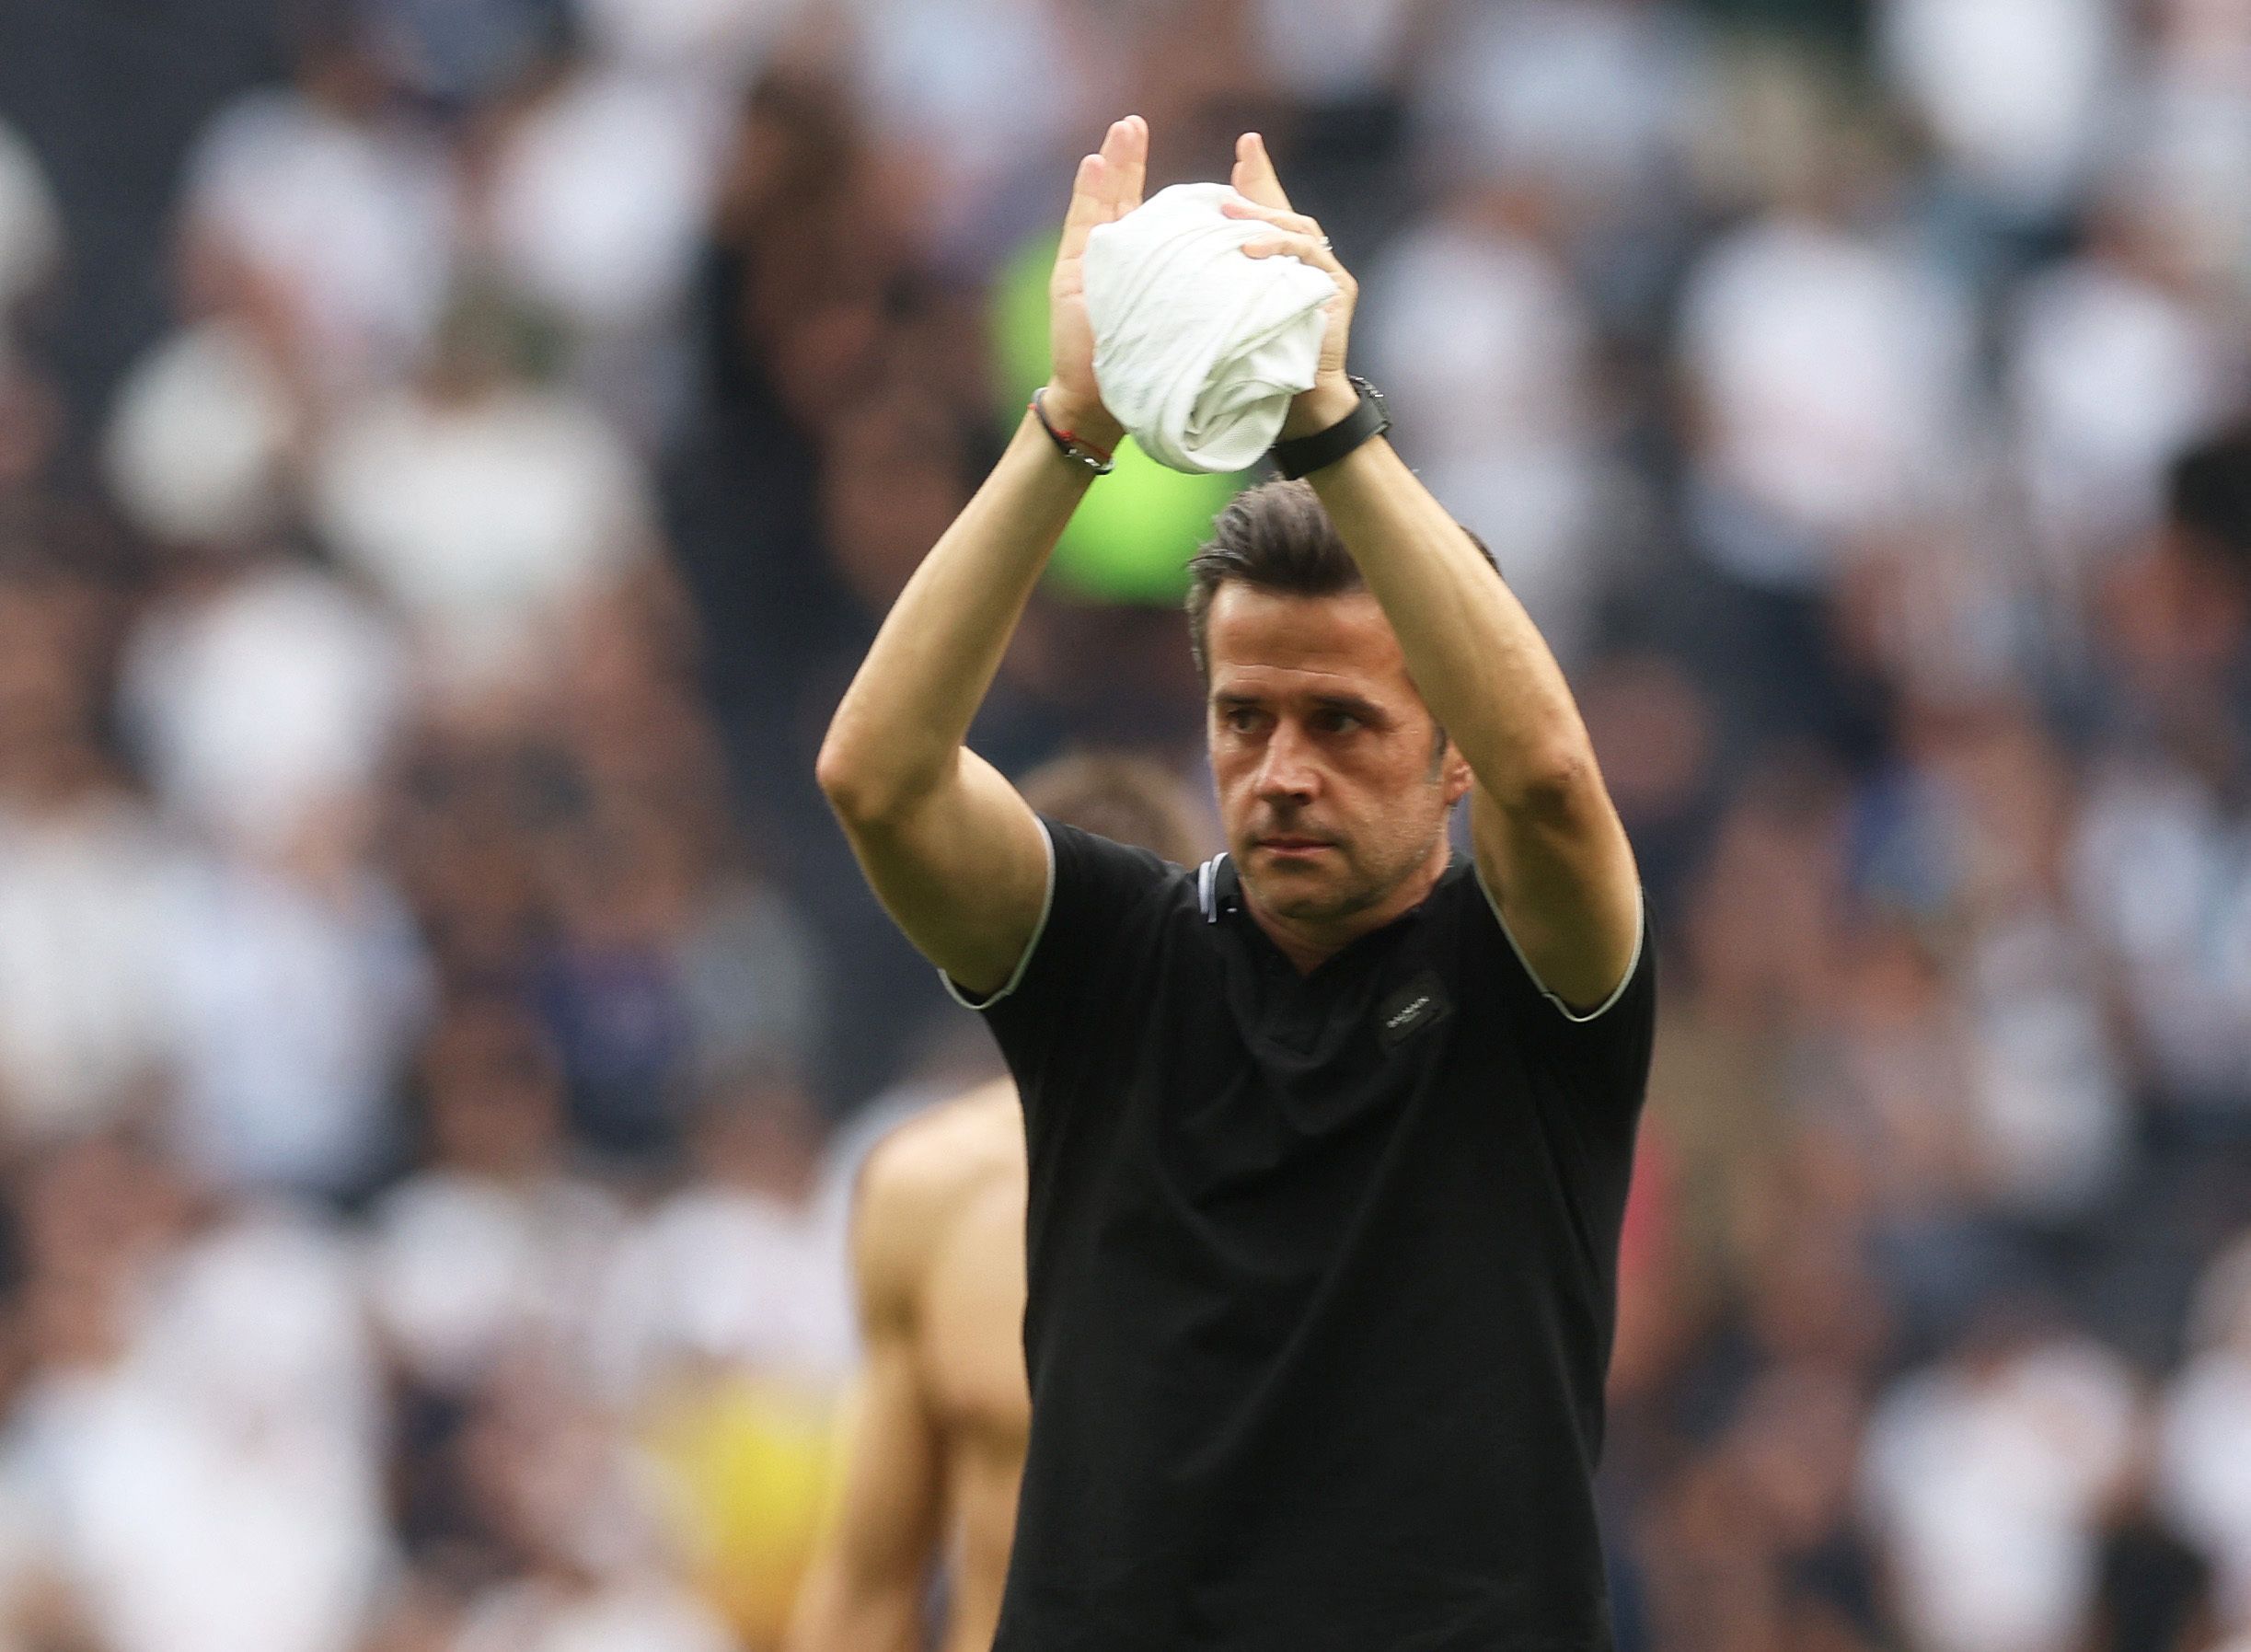 Soccer Football - Premier League - Tottenham Hotspur v Fulham - Tottenham Hotspur Stadium, London, Britain - September 3, 2022 Fulham manager Marco Silva applauds fans after the match Action Images via Reuters/Paul Childs EDITORIAL USE ONLY. No use with unauthorized audio, video, data, fixture lists, club/league logos or 'live' services. Online in-match use limited to 75 images, no video emulation. No use in betting, games or single club /league/player publications.  Please contact your account 